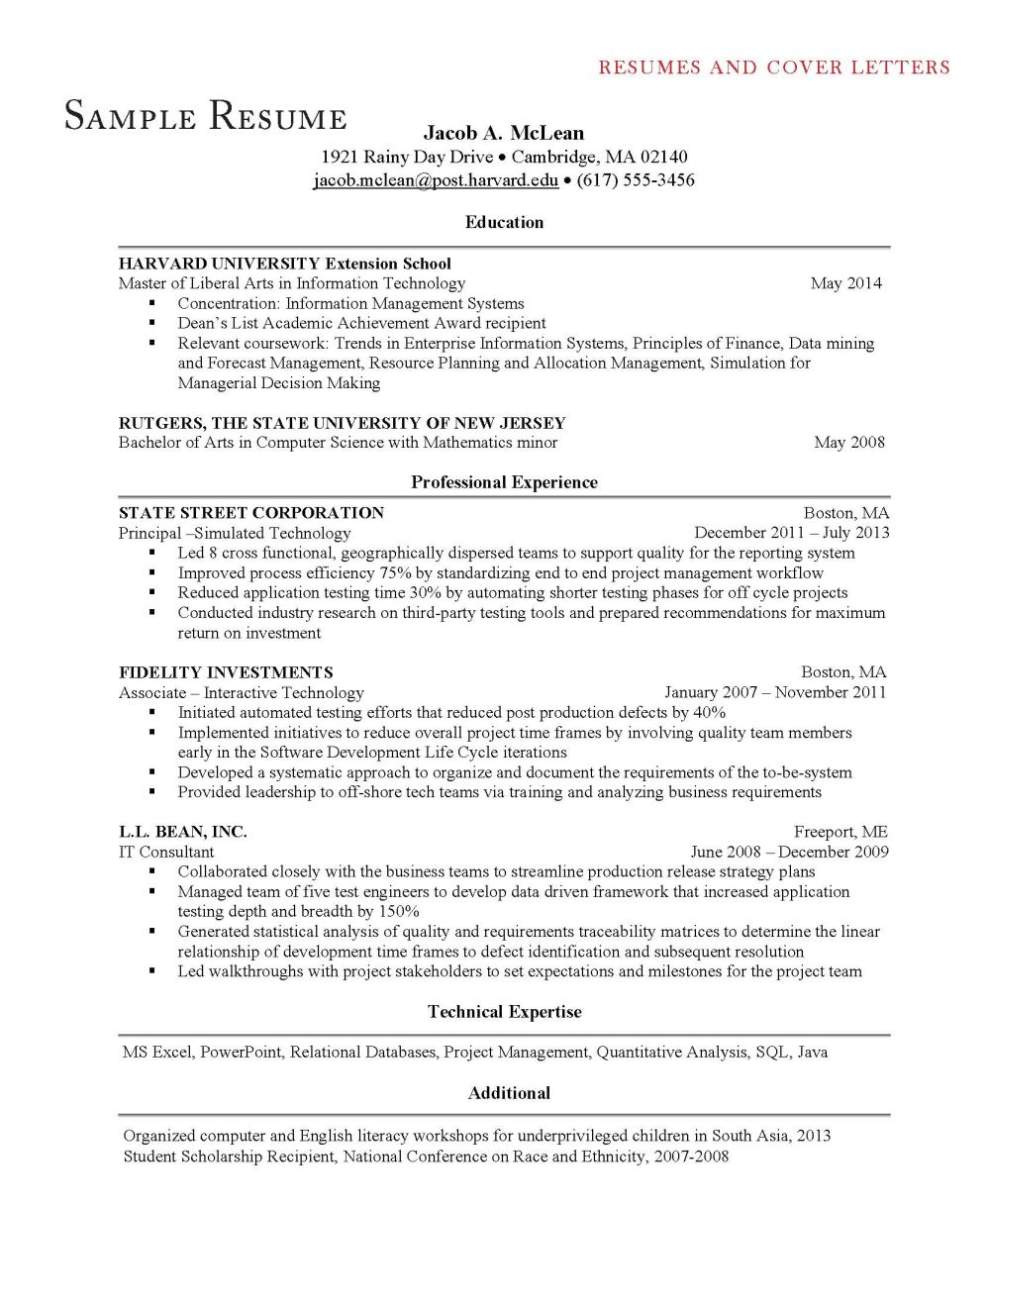 harvard extension school resume and cover letter guide